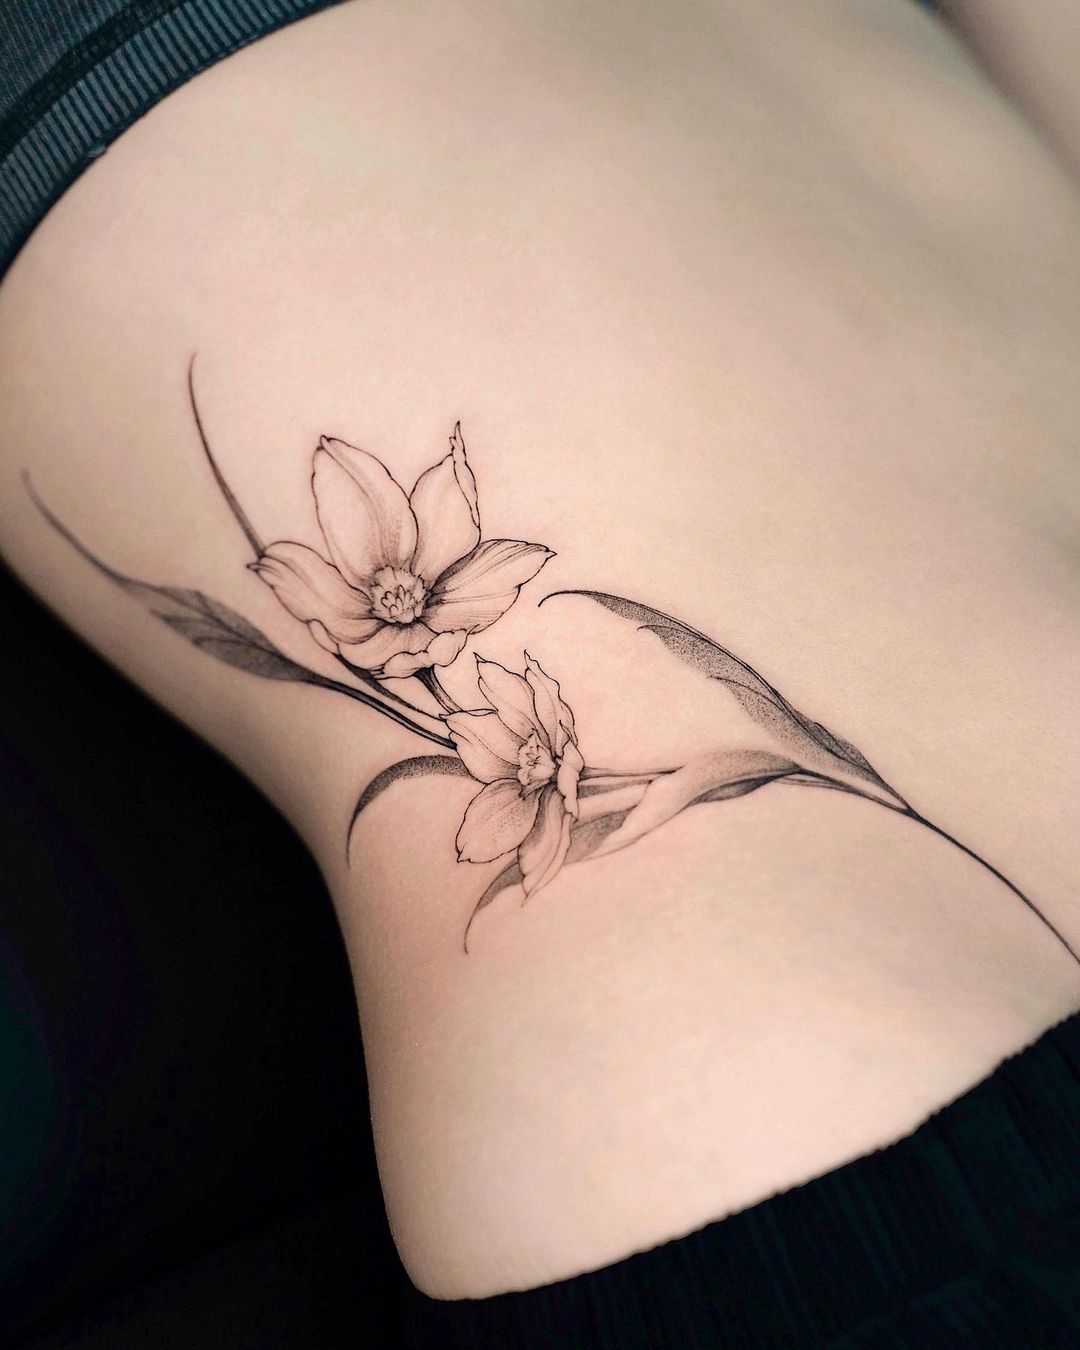 Black and White Narcissus Flower Tattoo on Side